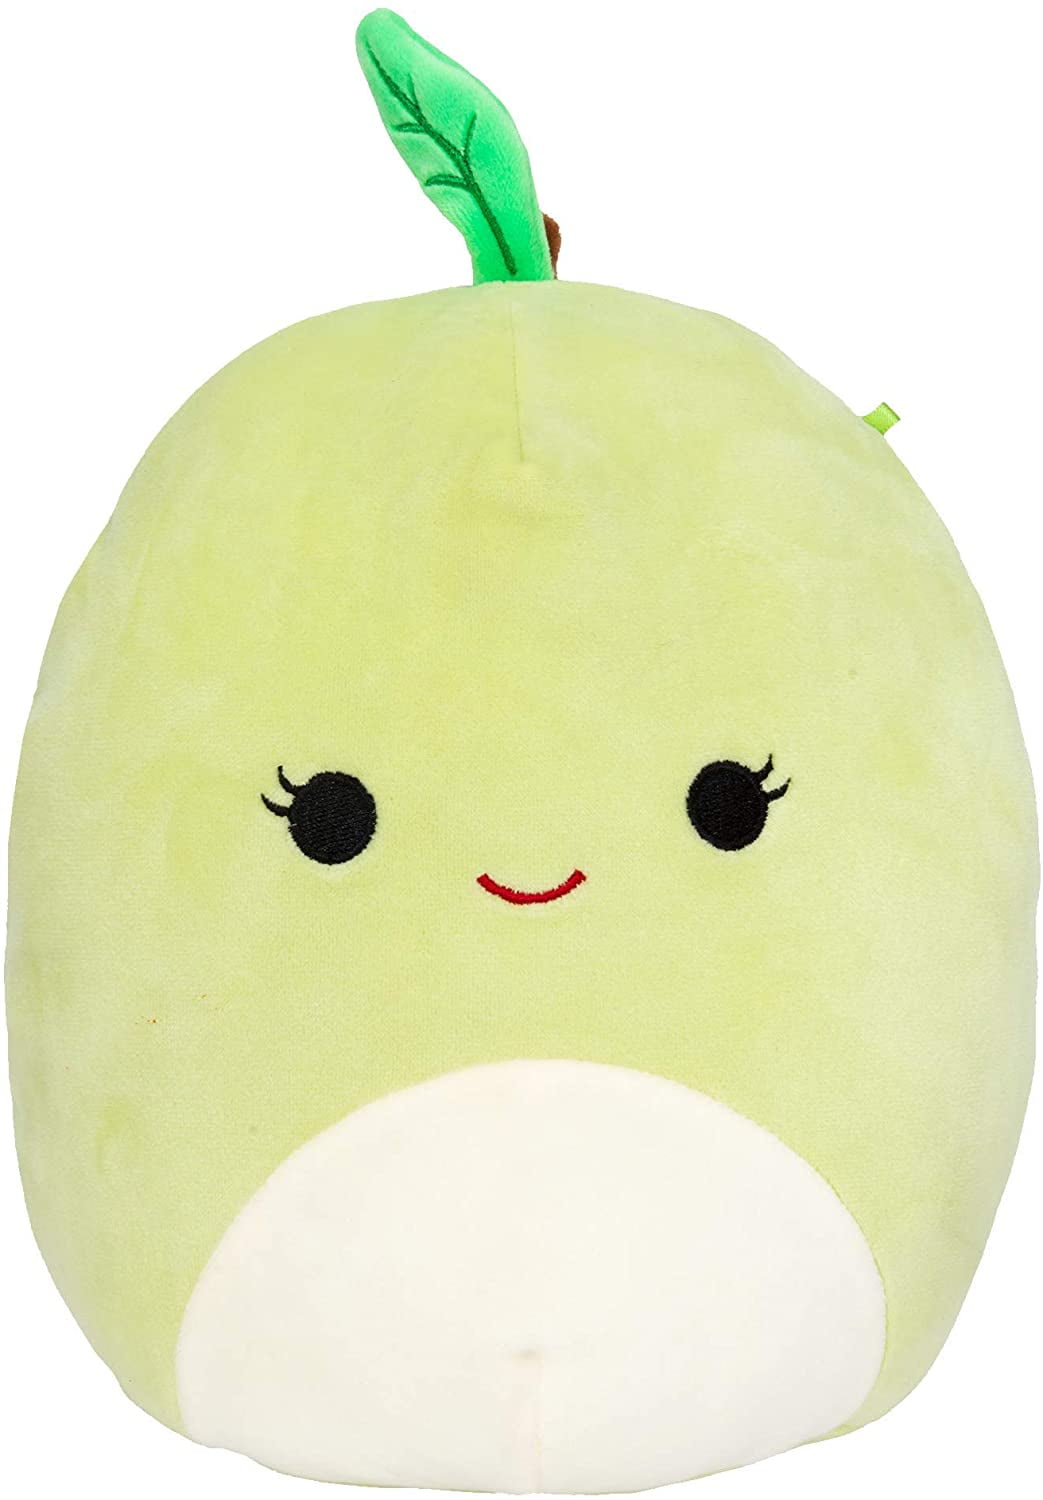 Squishmallow Fruit Ashley Apple Stuffed Plush Doll Bed Pillow Toy Gift Decor 8" 